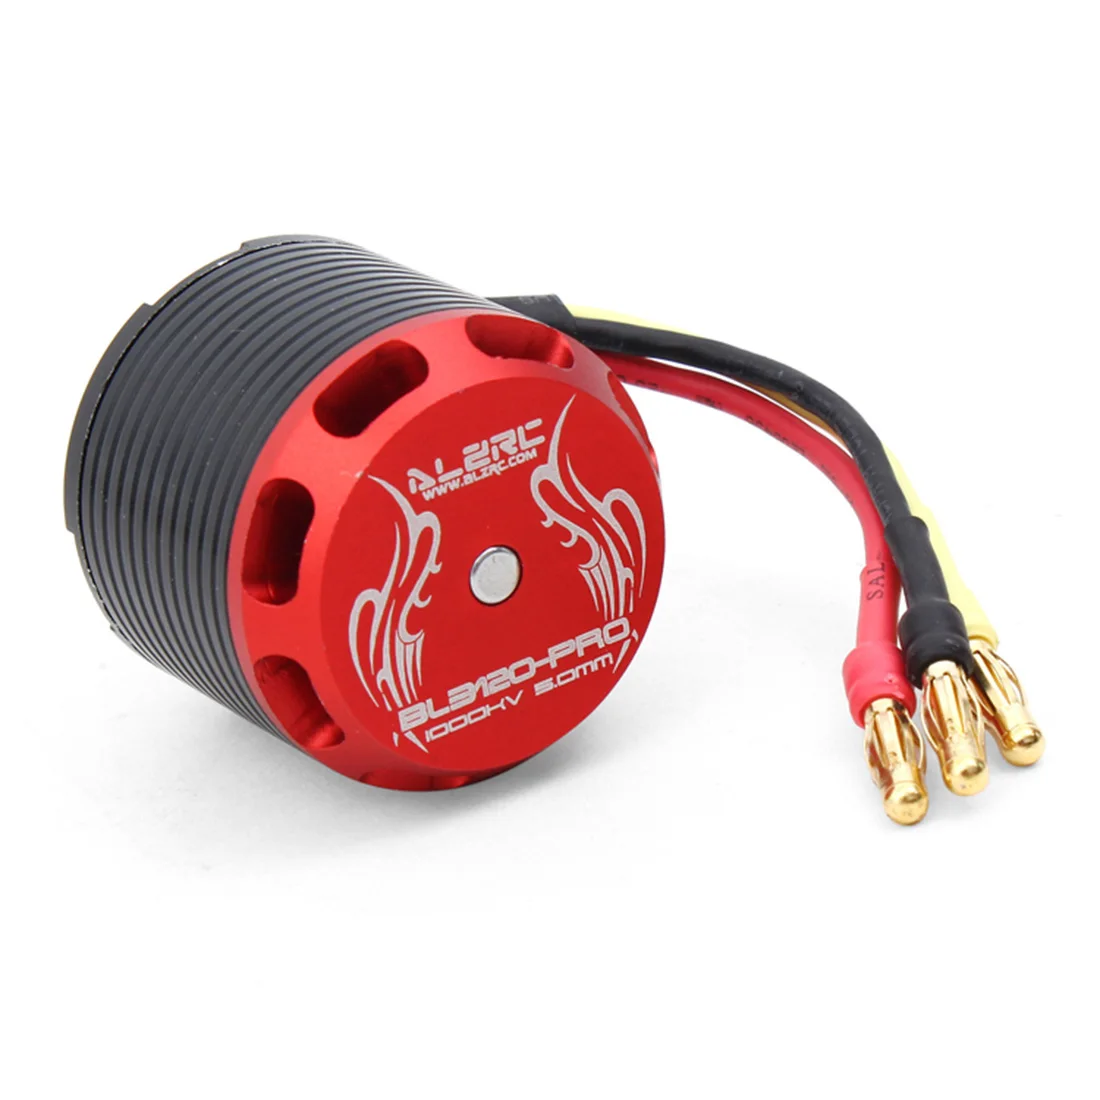 

1Pc Original ALZRC-Devil 380/420 RC Helicopter Parts Brushless Motor 3120-PRO 1000KV High Quality Accessories for RC Model